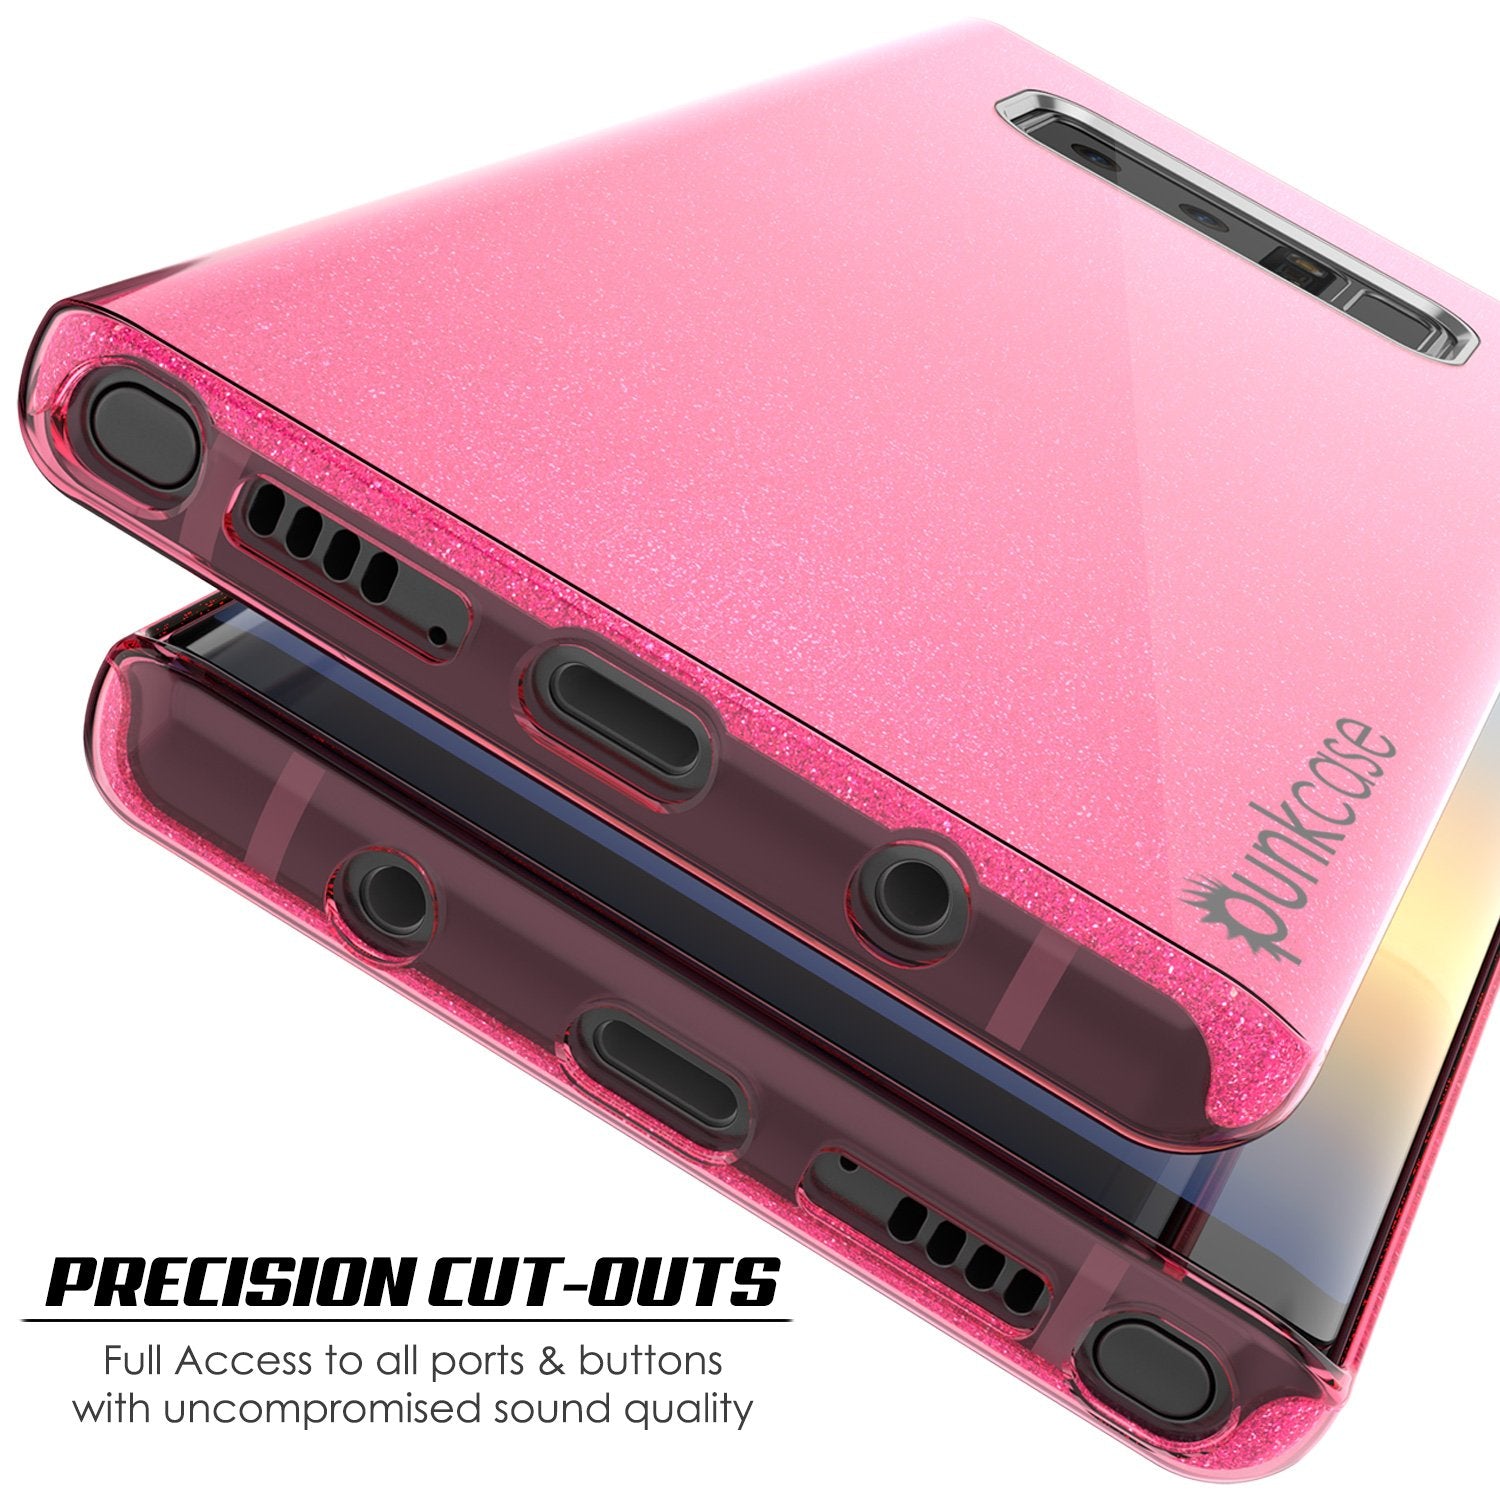 Galaxy Note 8 Case, Punkcase Galactic 2.0 Series Ultra Slim [Pink]